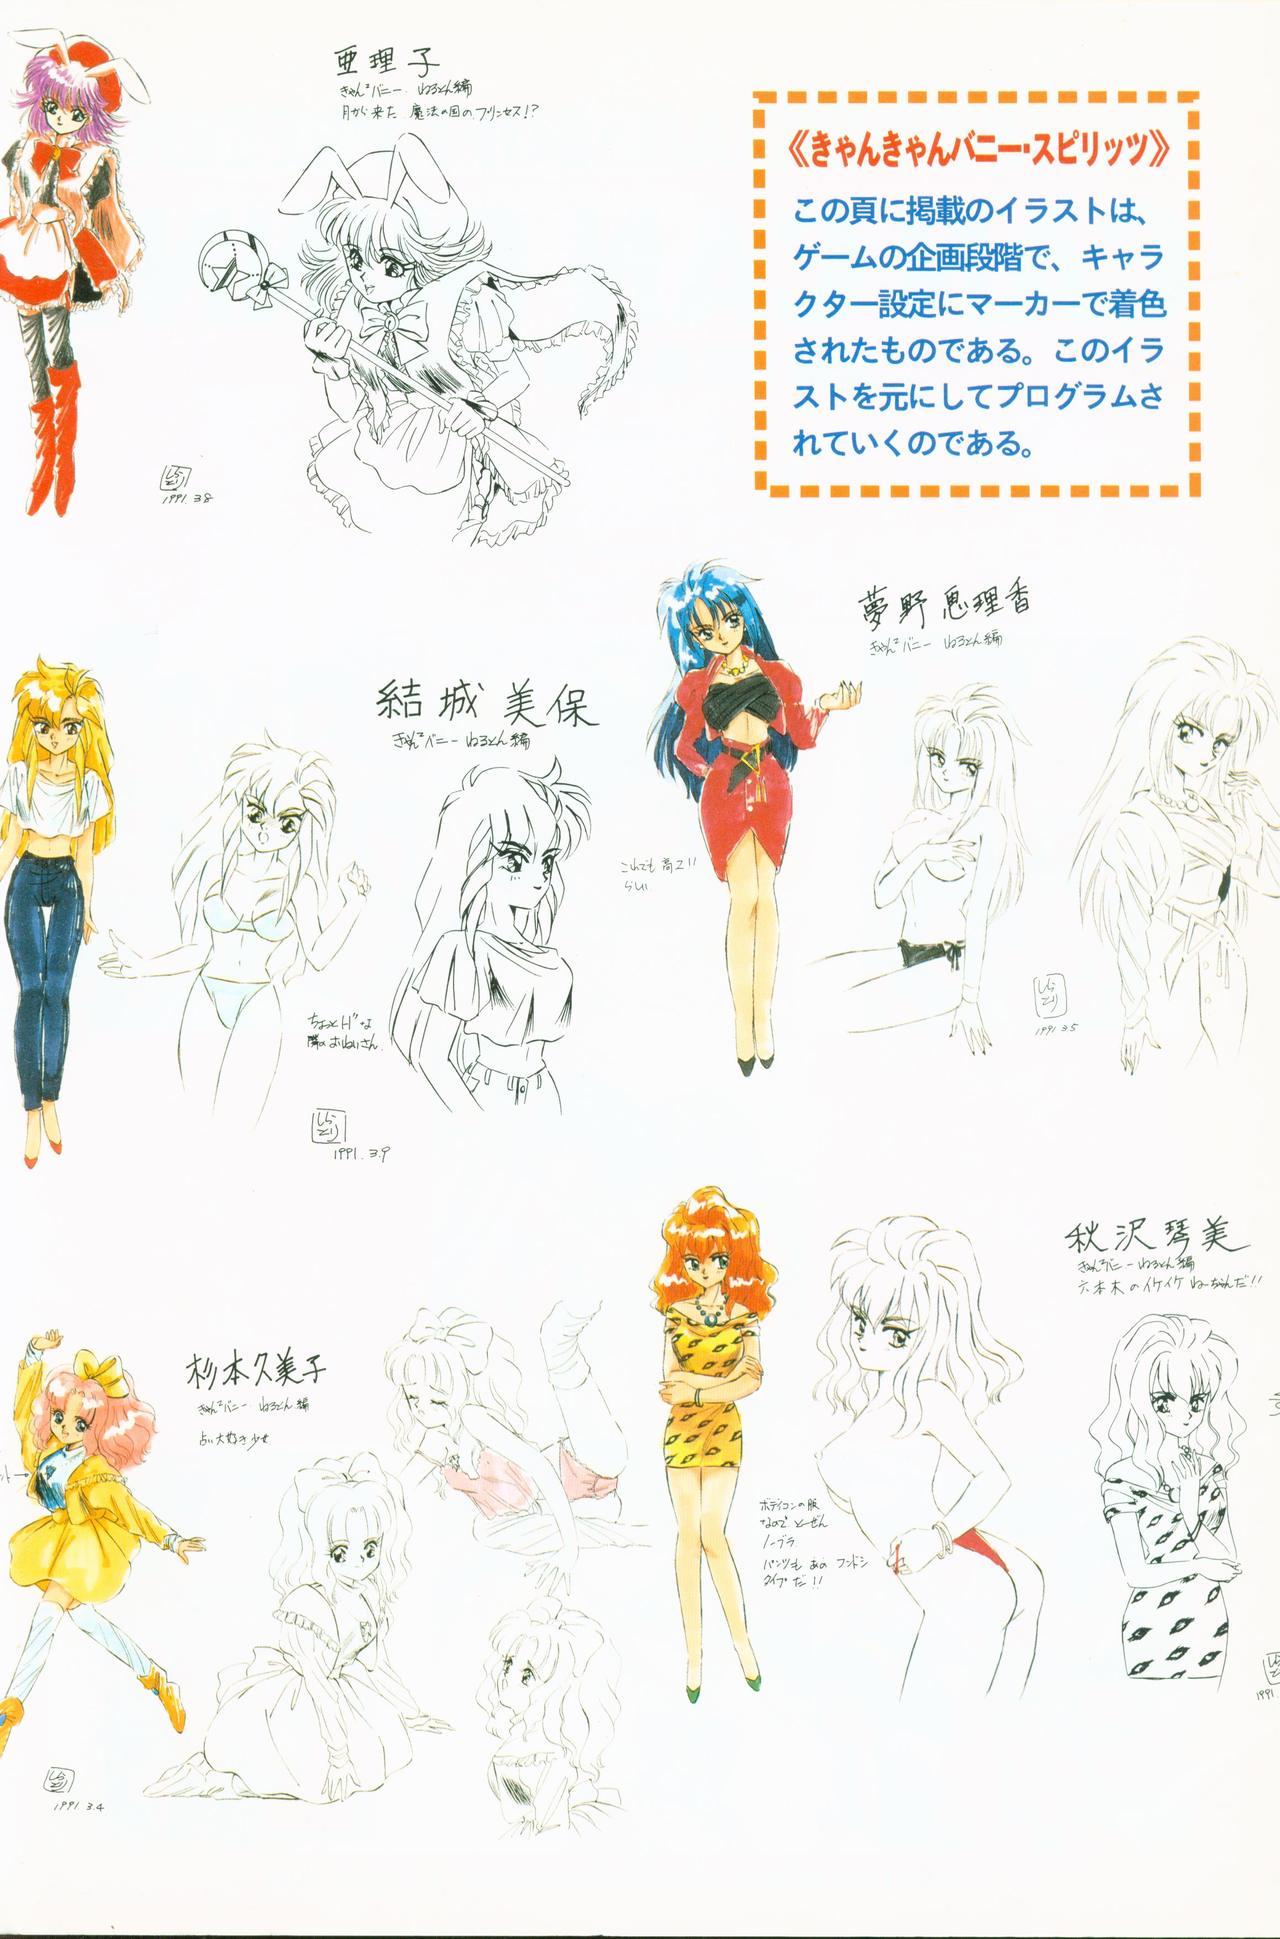 Cojiendo CAN CAN BUNNY OFFICIAL ART BOOK - Can can bunny Free Blow Job - Page 4